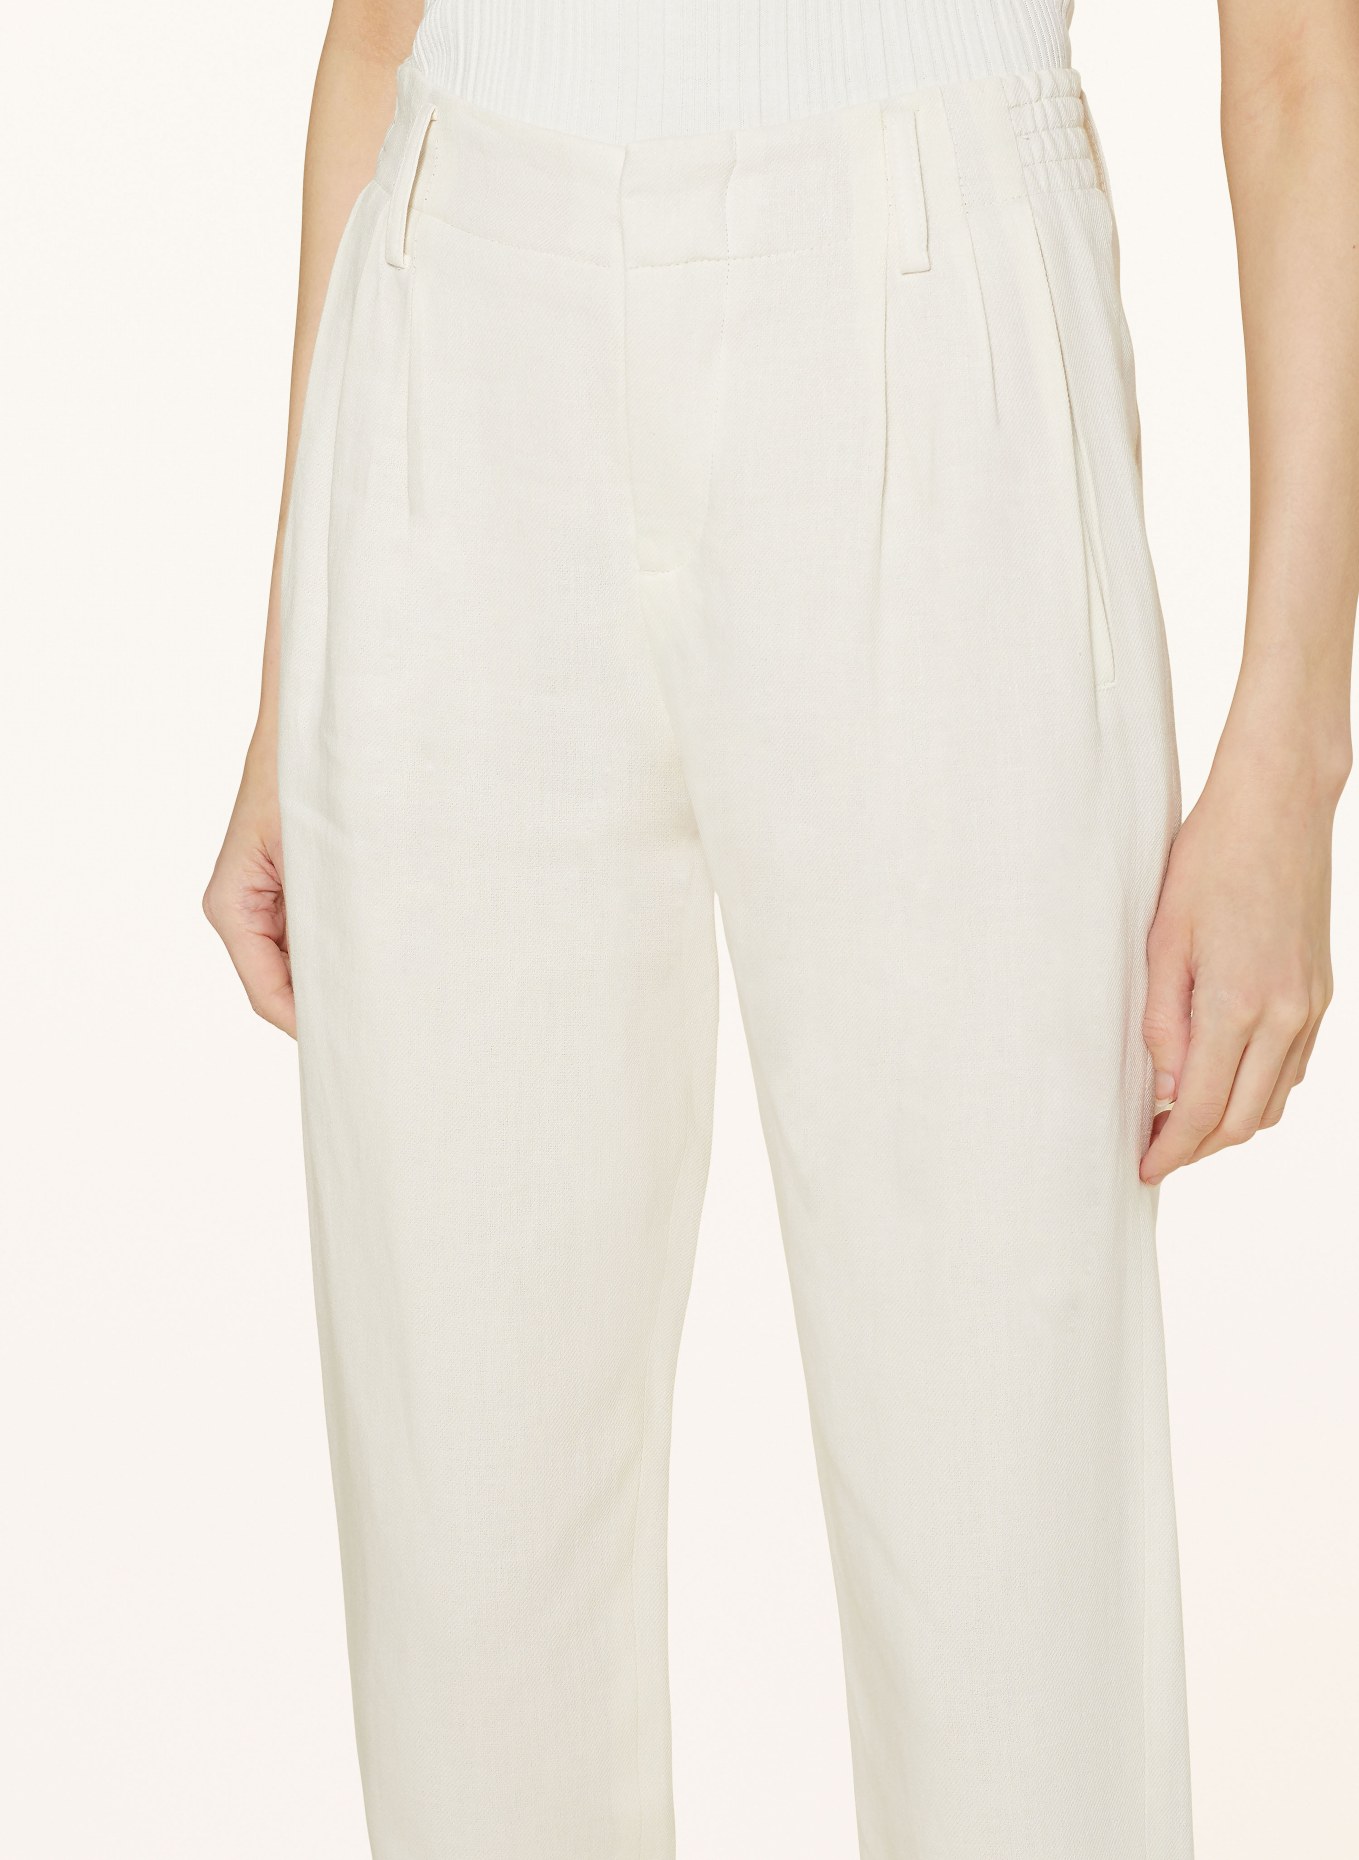 DRYKORN 7/8 trousers DISPATCH with linen, Color: ECRU (Image 5)